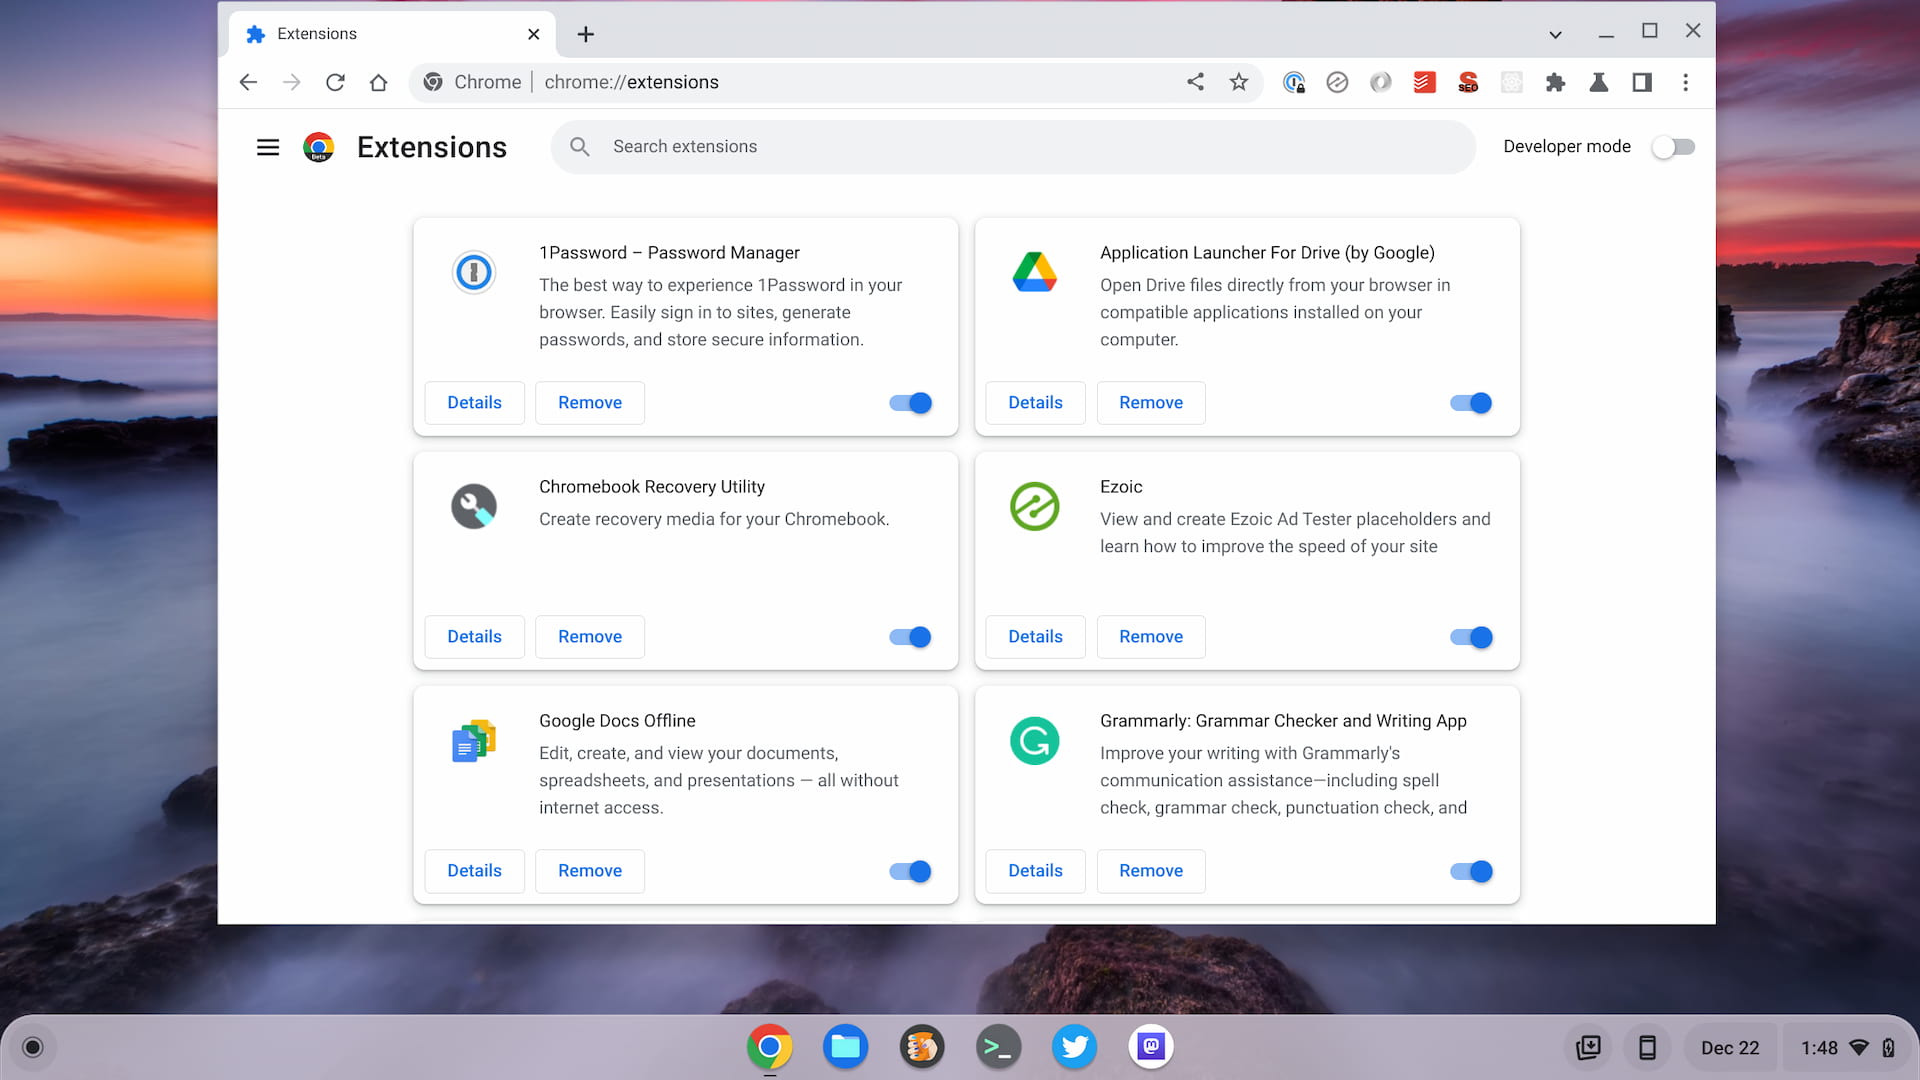 Chrome 117 will alert users with old extensions installed